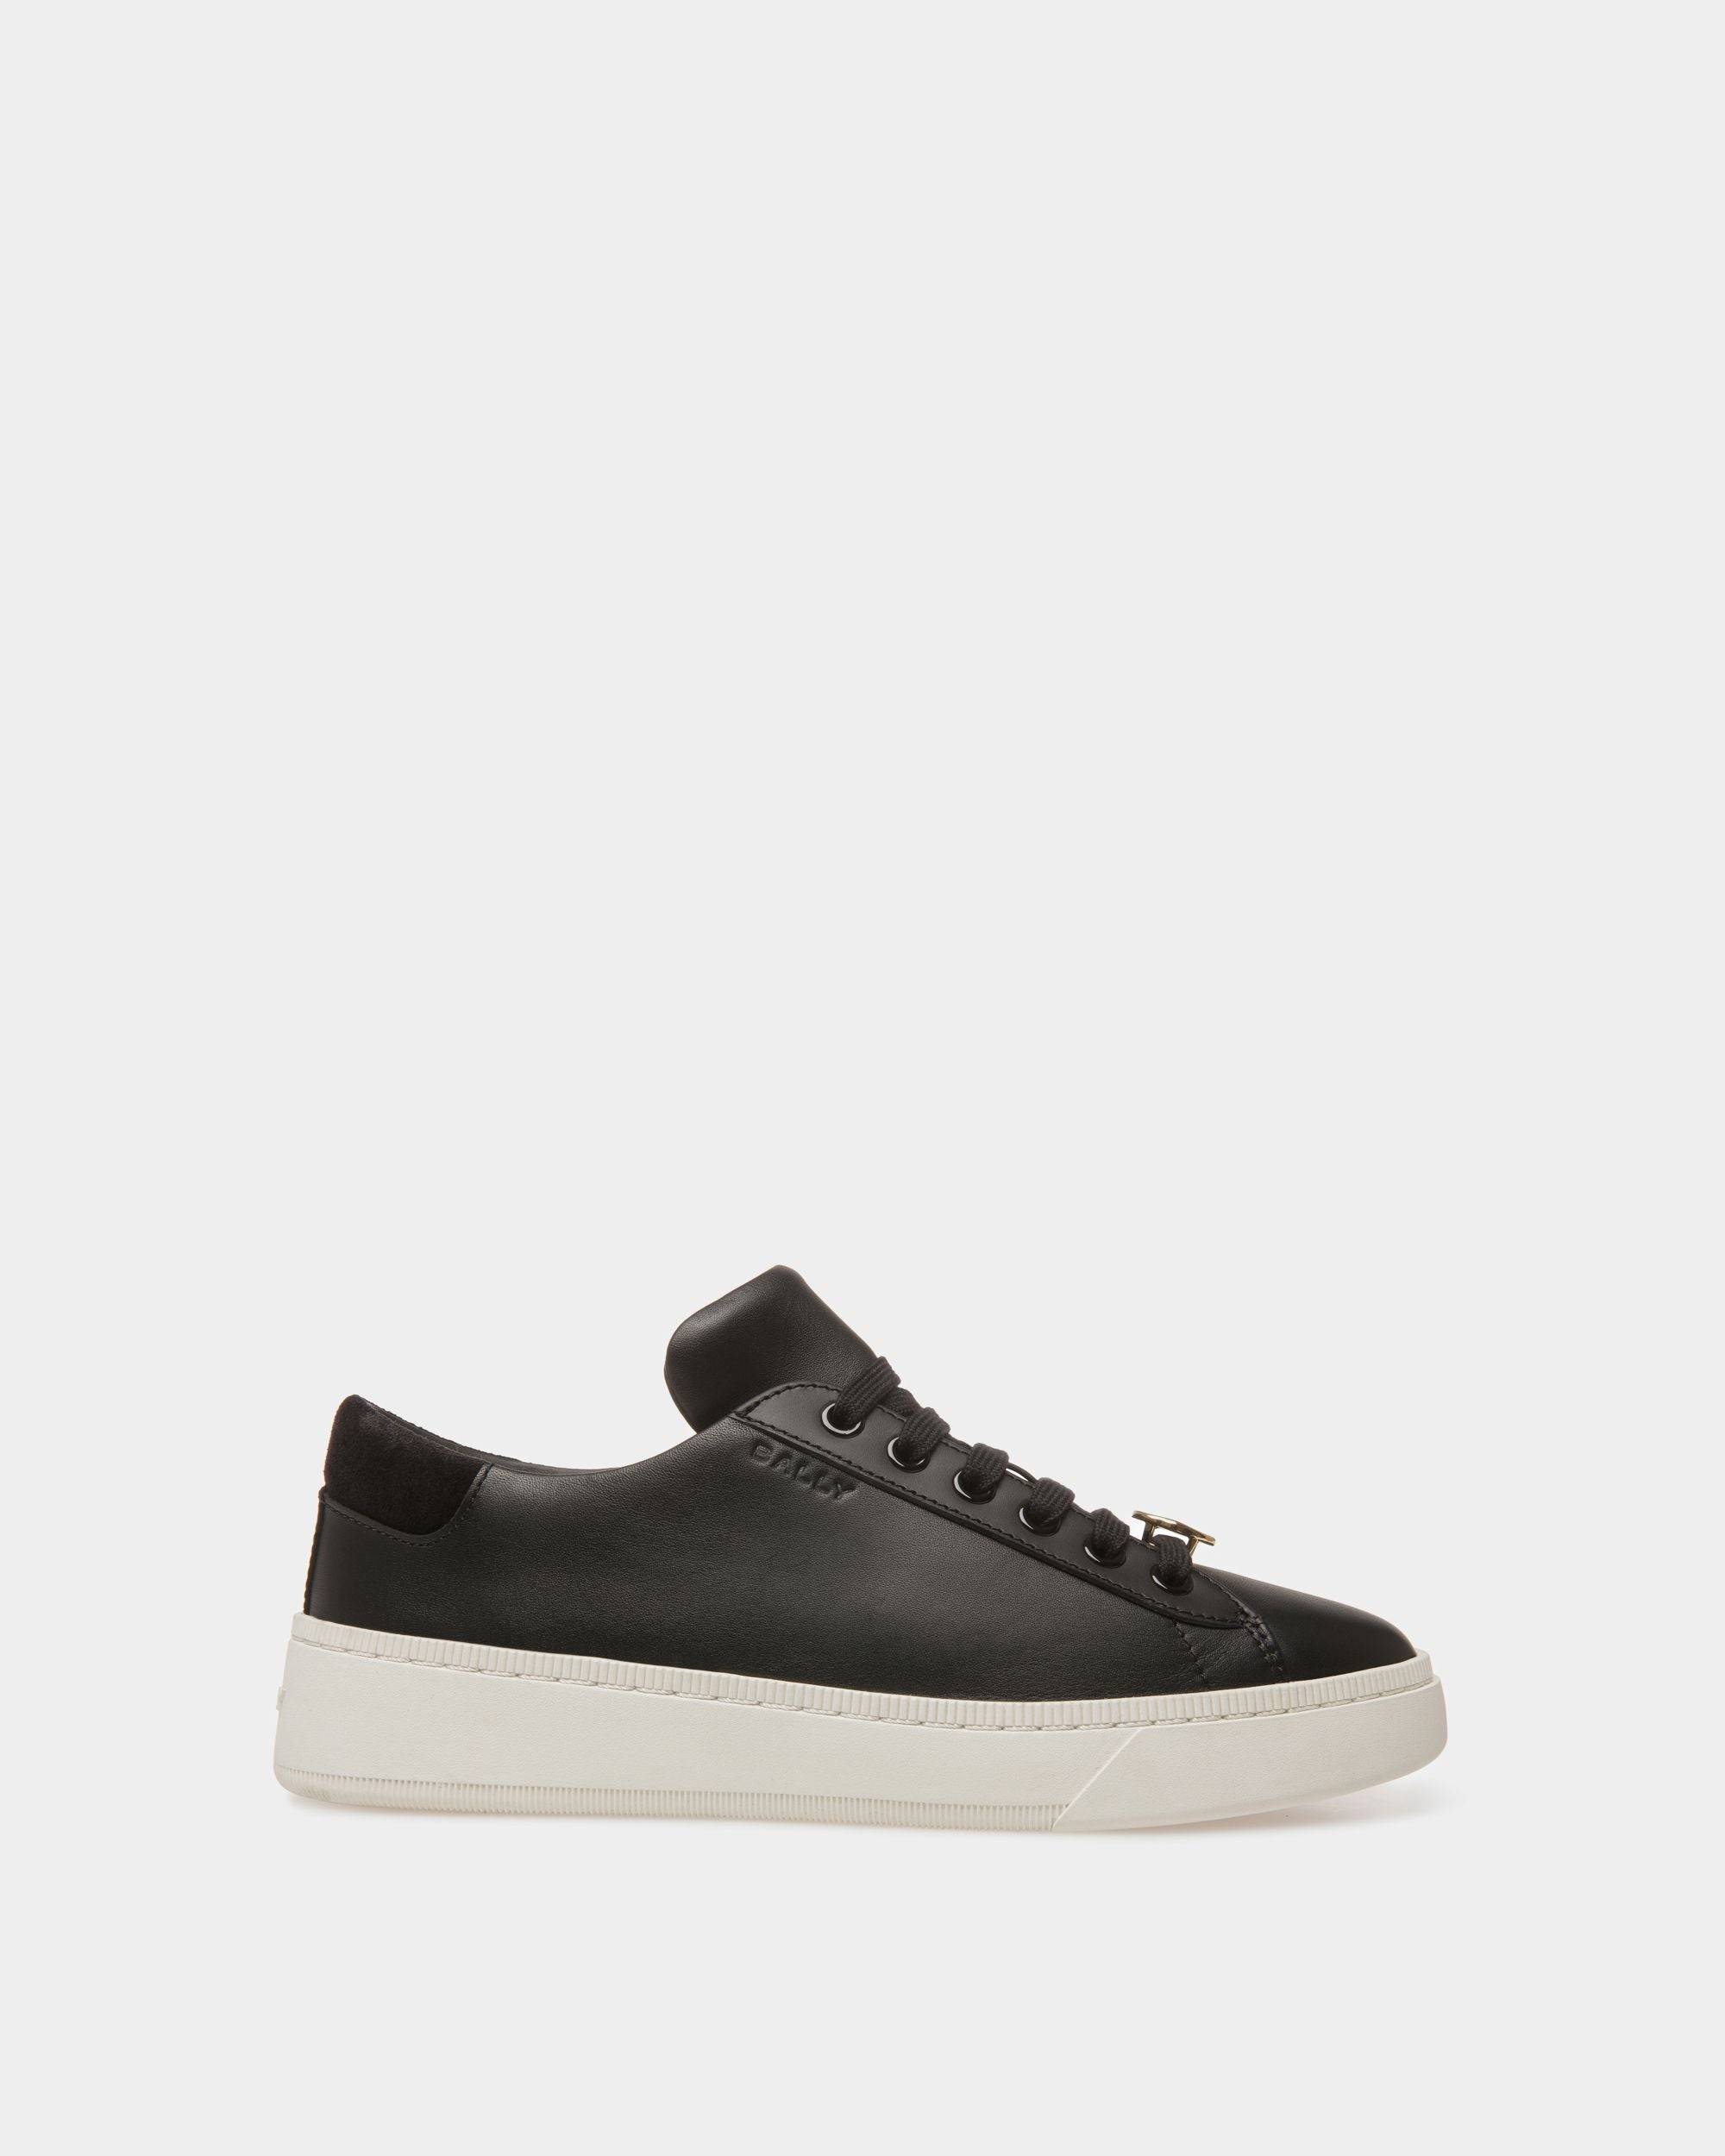 Women's Raise Sneakers In Black And White Leather | Bally | Still Life Side